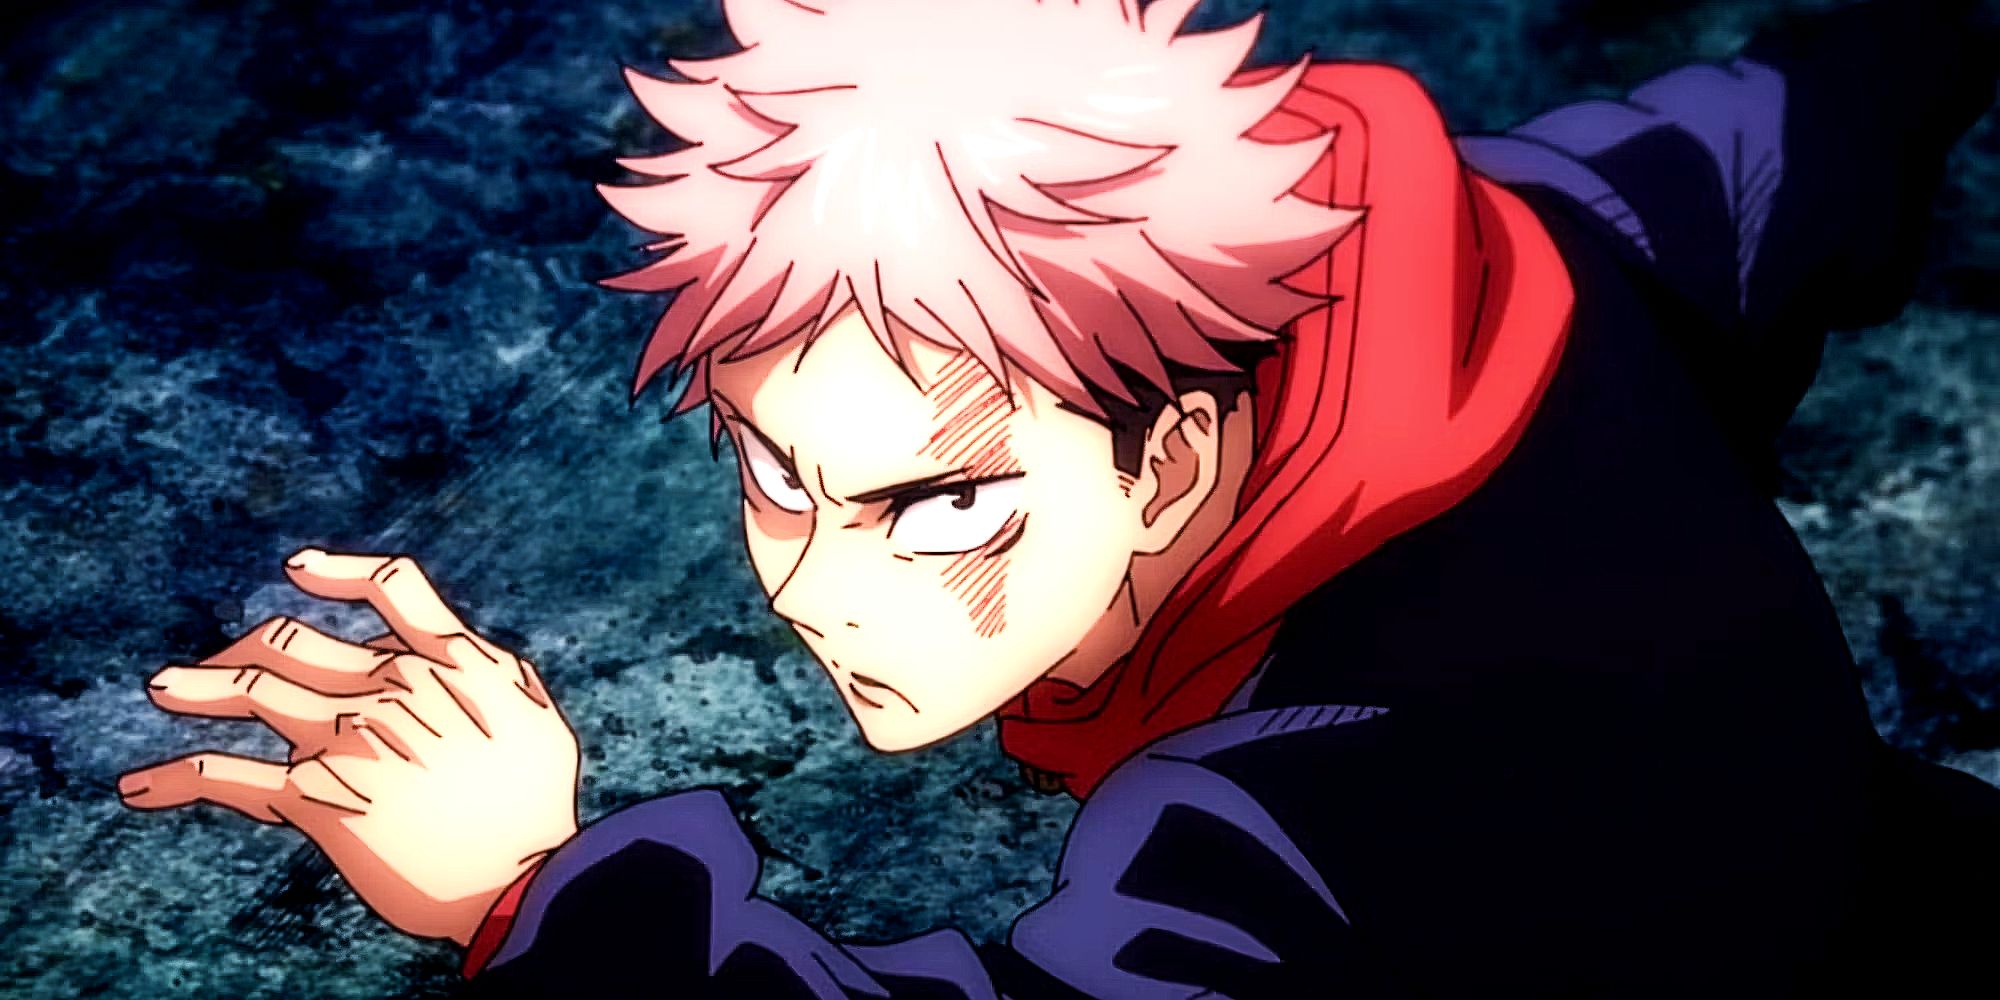 Yuji is ready to fight in Jujutsu Kaisen with a menacing glare